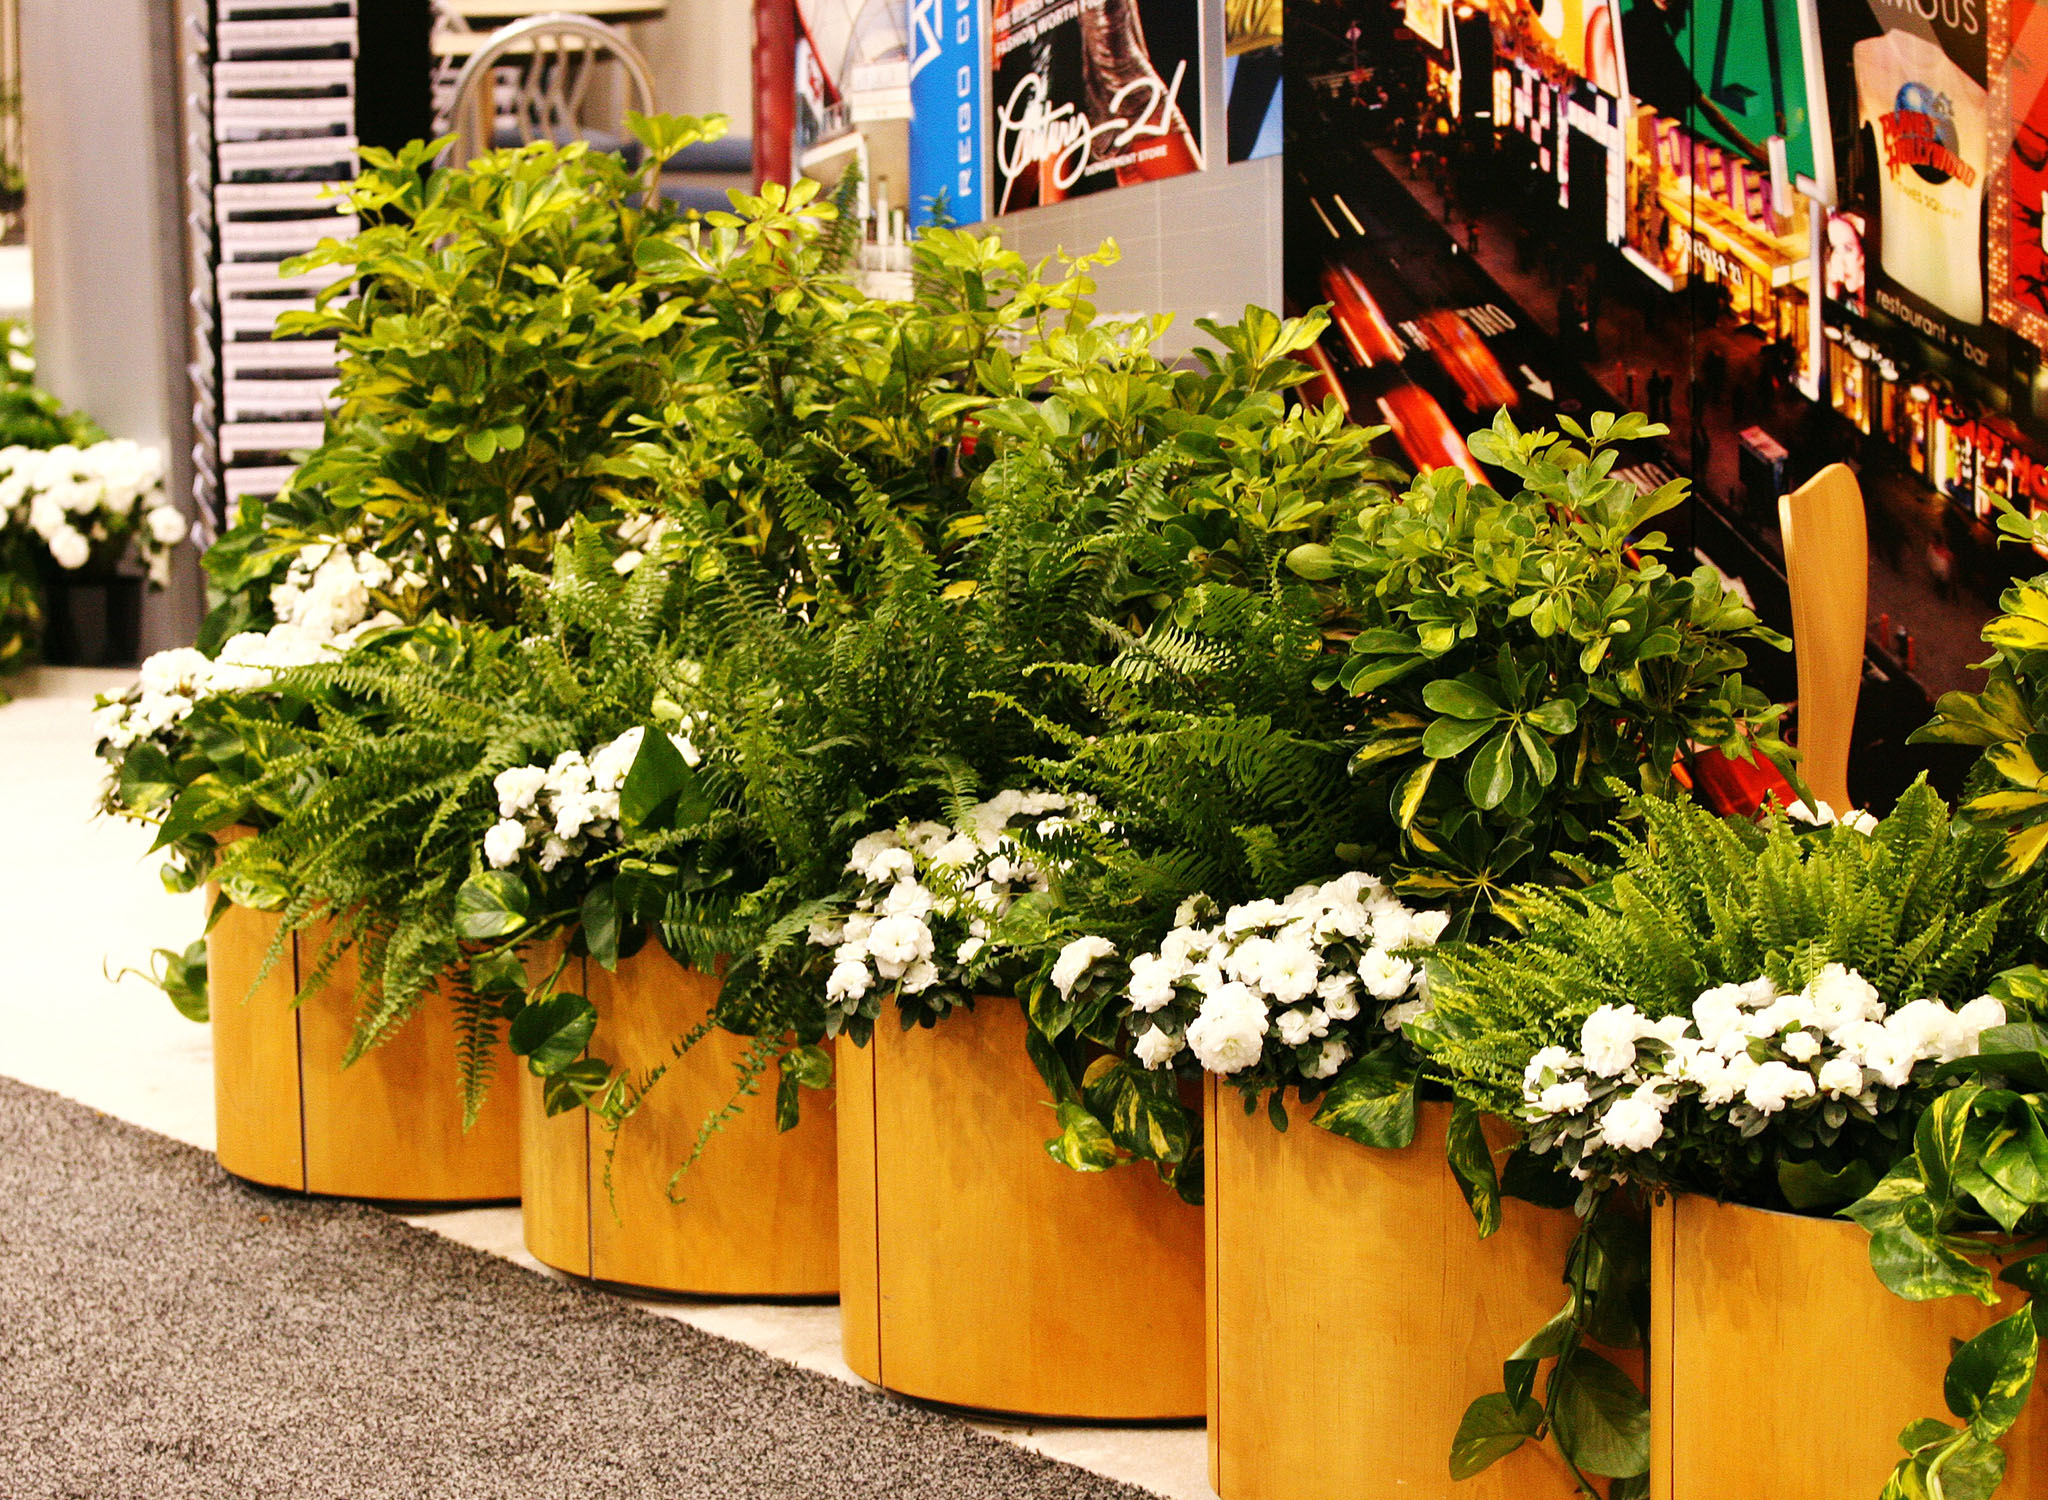 Row of plants rented for a trade show.